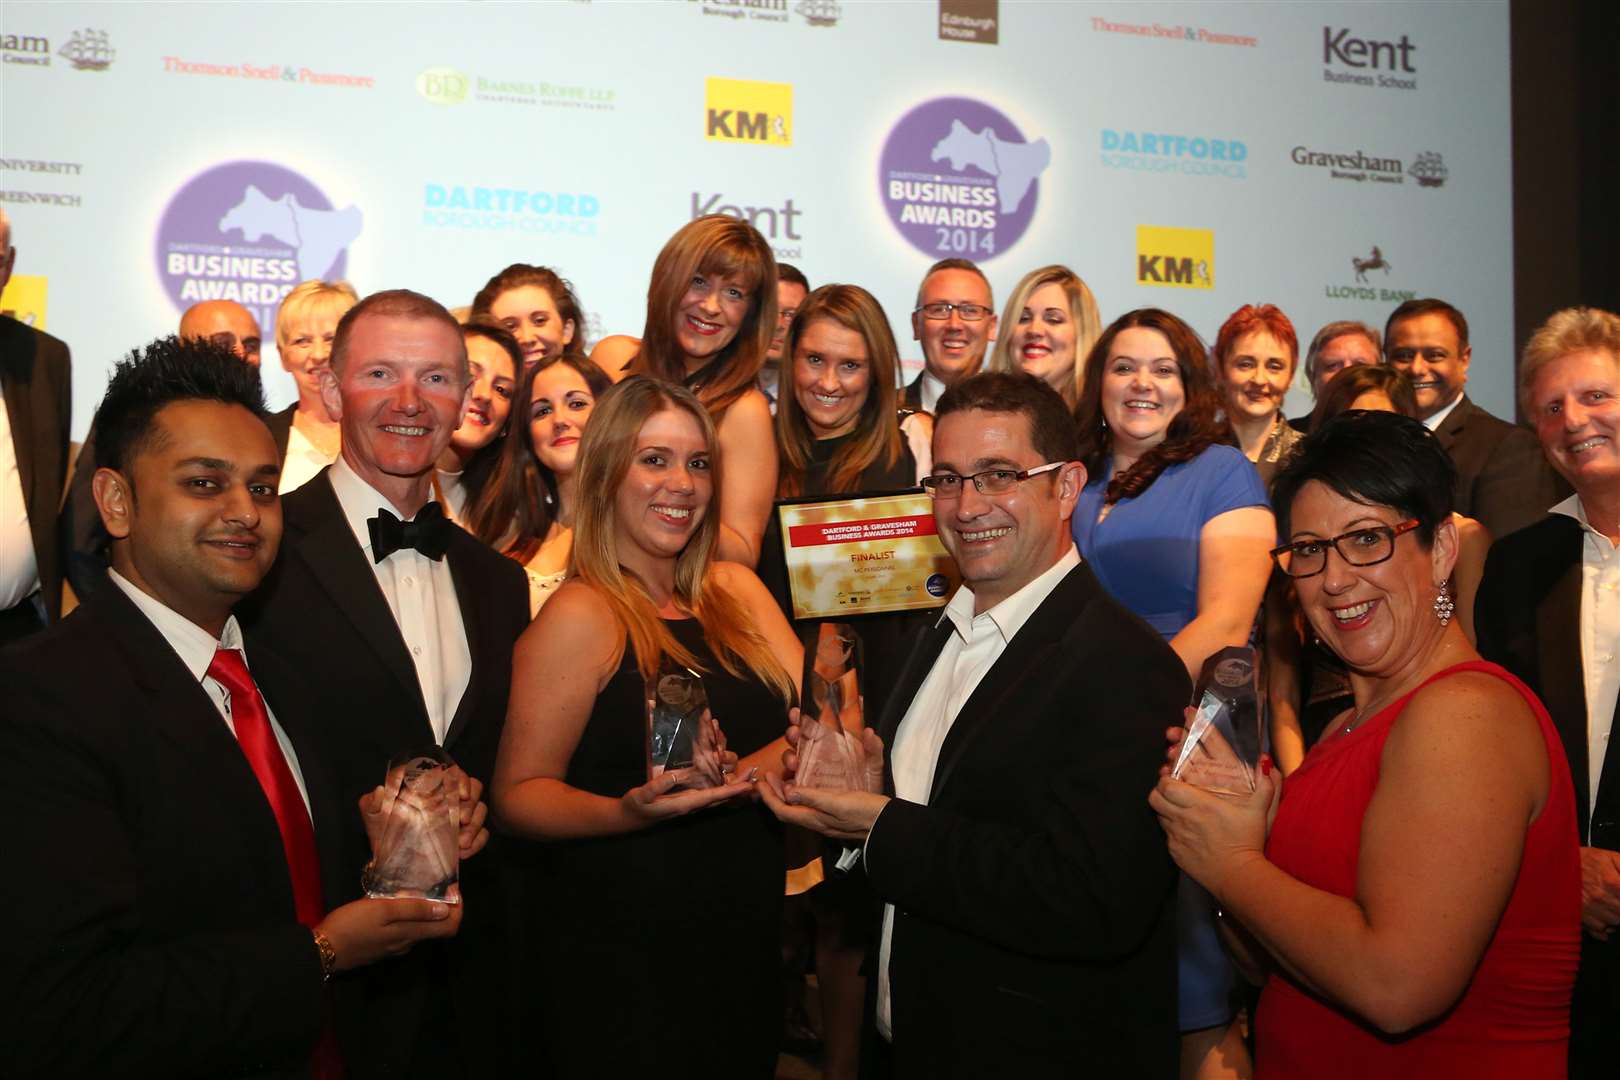 All the winners at the Dartford and Gravesham Business Awards 2014